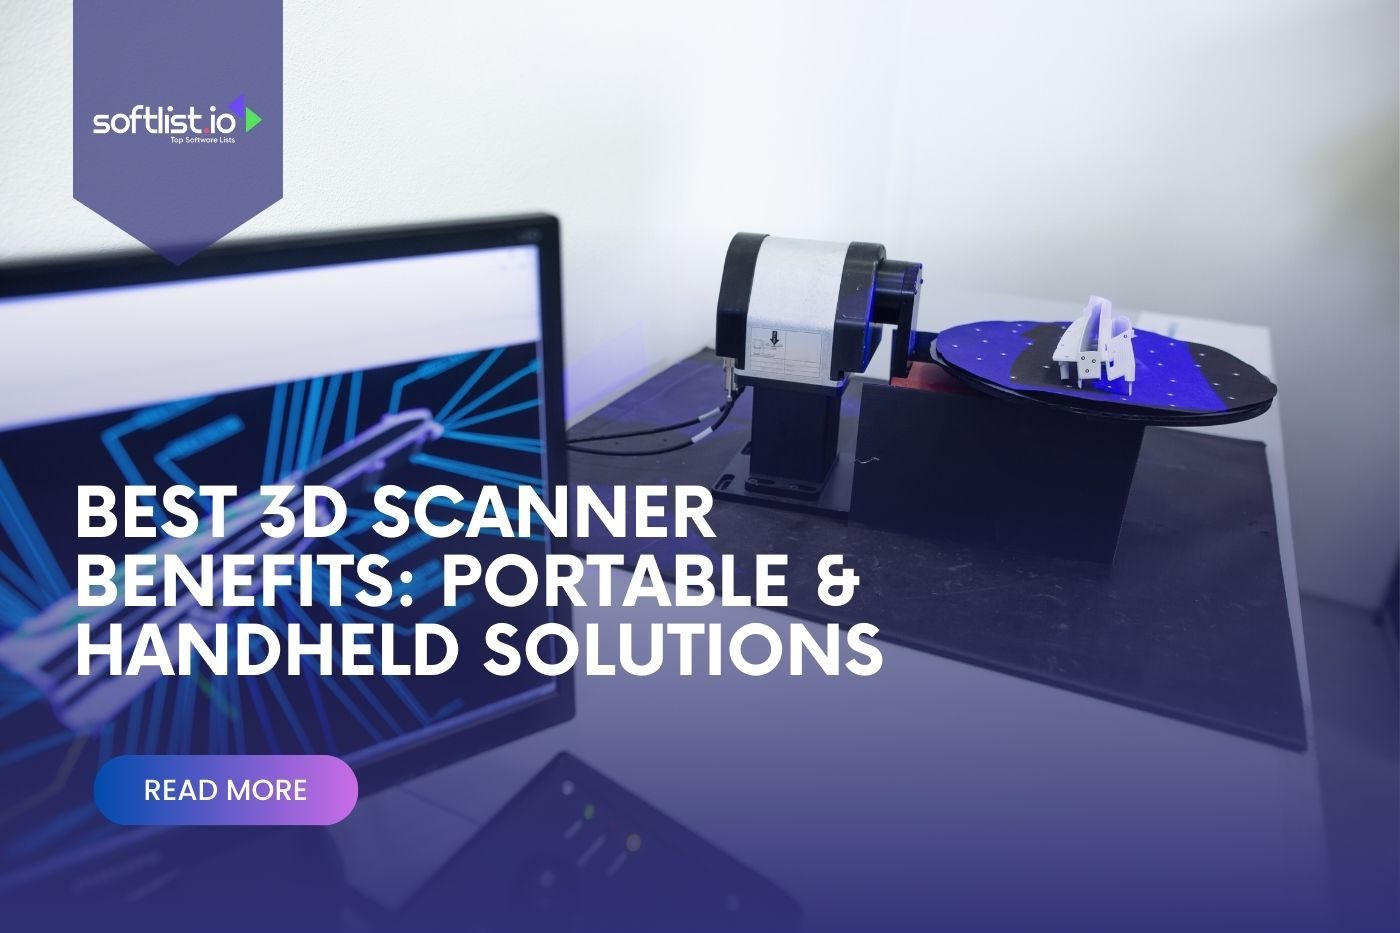 Choosing the Best 3D Scanner: Unlock the Benefits of Portable 3D Scanning for Everyday Use